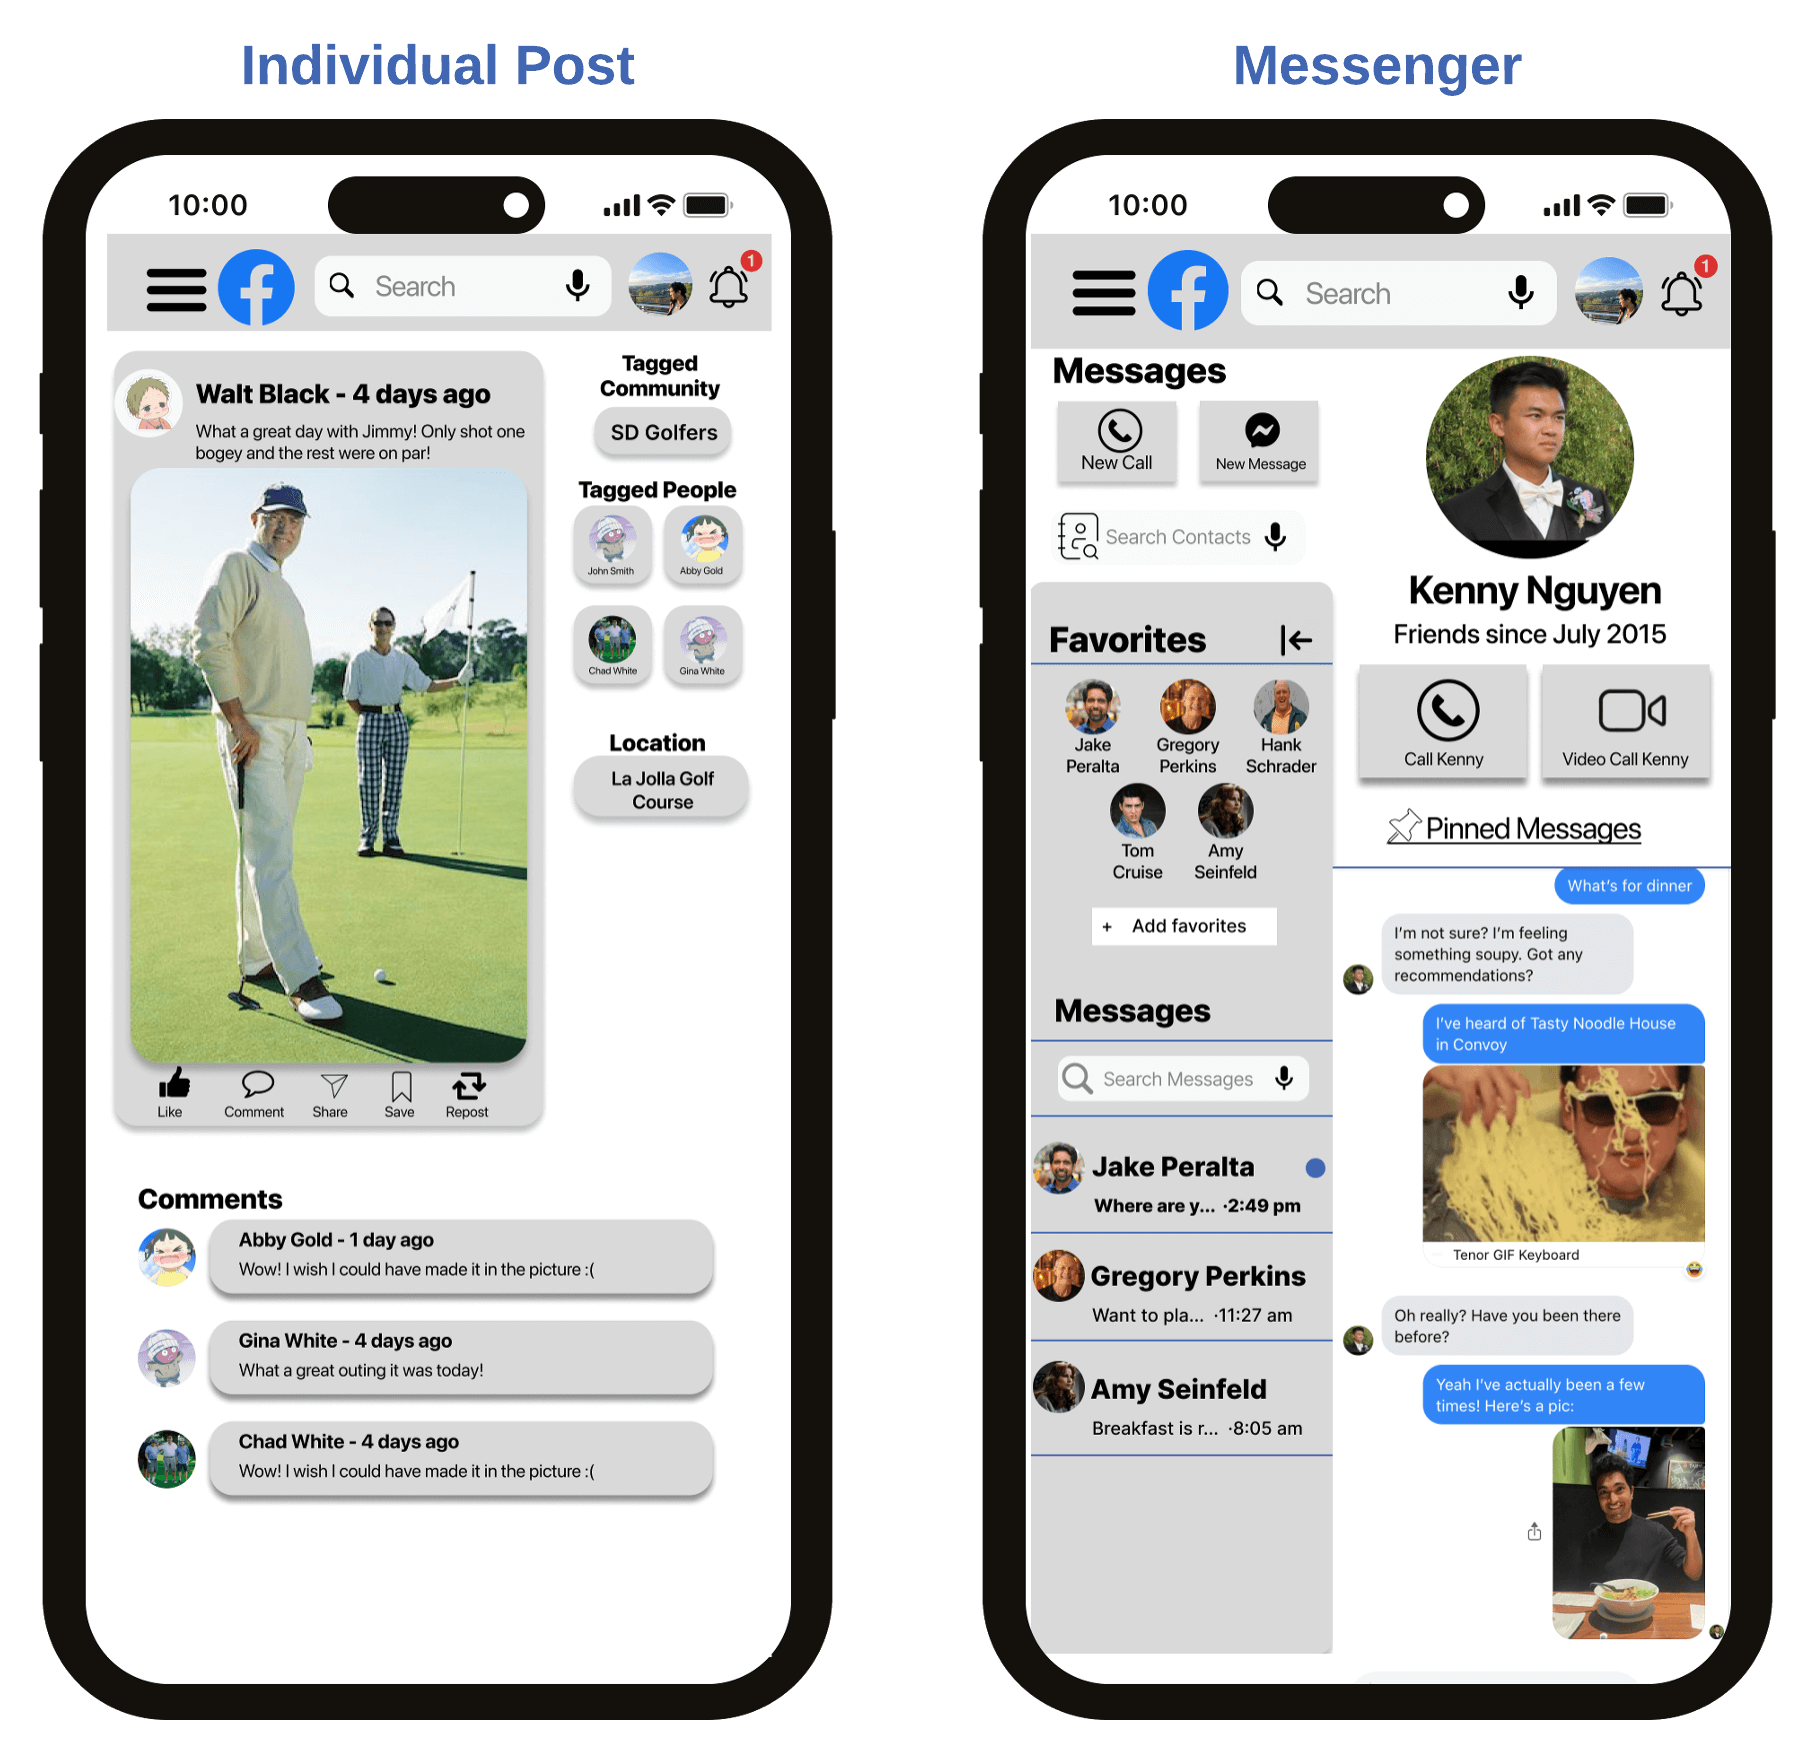 High-Fidelity Prototype of Post and Messenger